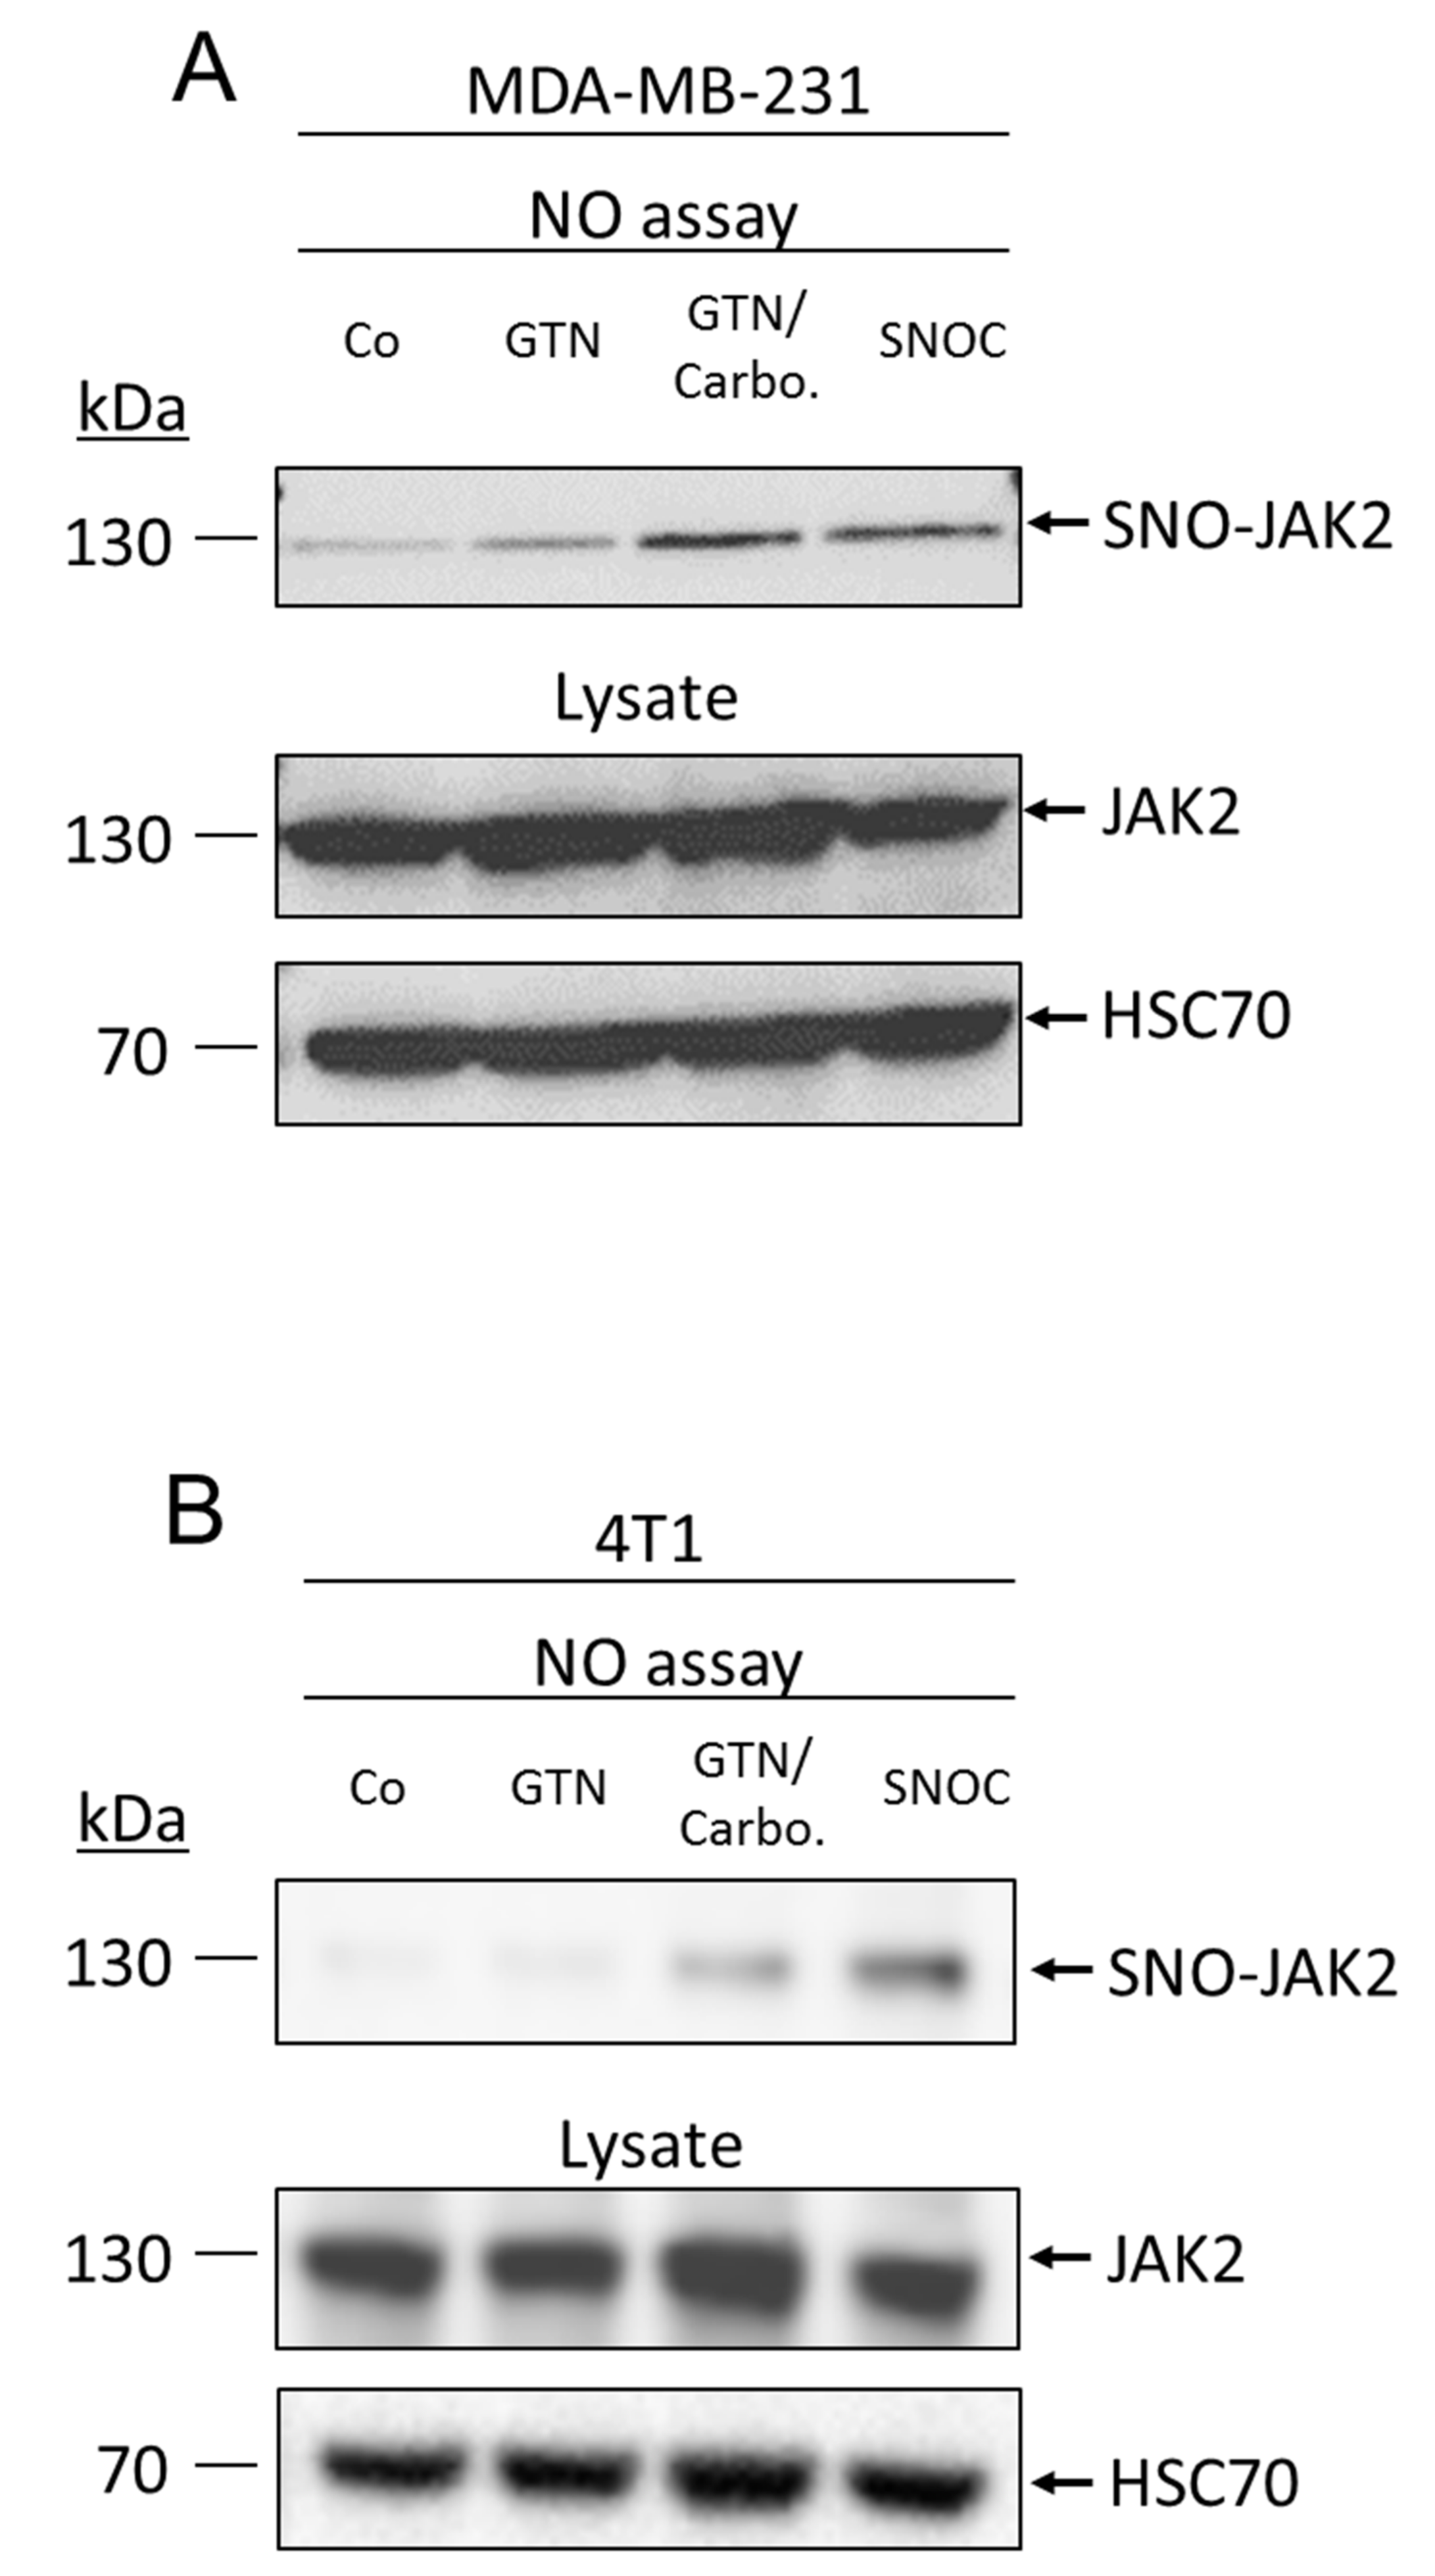 IJMS | Free Full-Text | Nitric Oxide-Releasing Drug Glyceryl Trinitrate  Targets JAK2/STAT3 Signaling, Migration and Invasion of Triple-Negative  Breast Cancer Cells | HTML